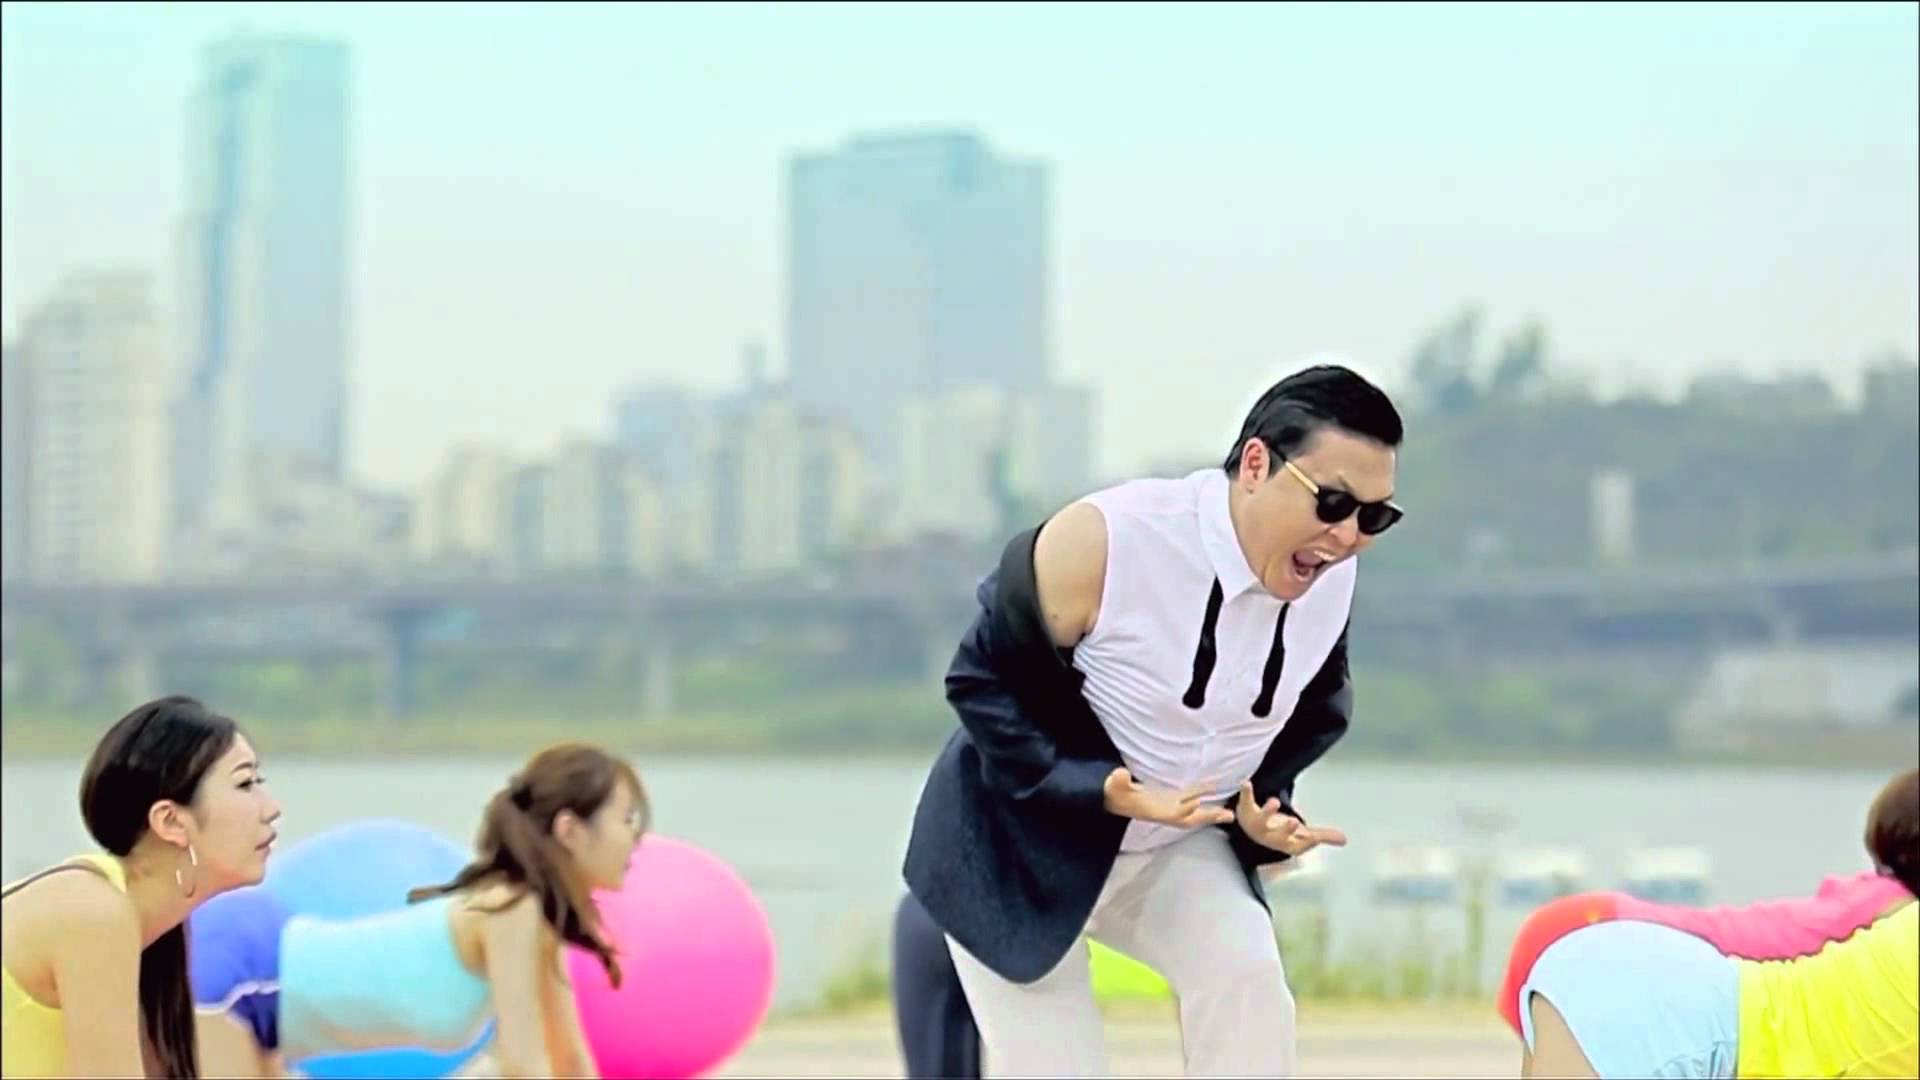 Psy Gangnam Style Screaming HD Wallpaper, Background Image